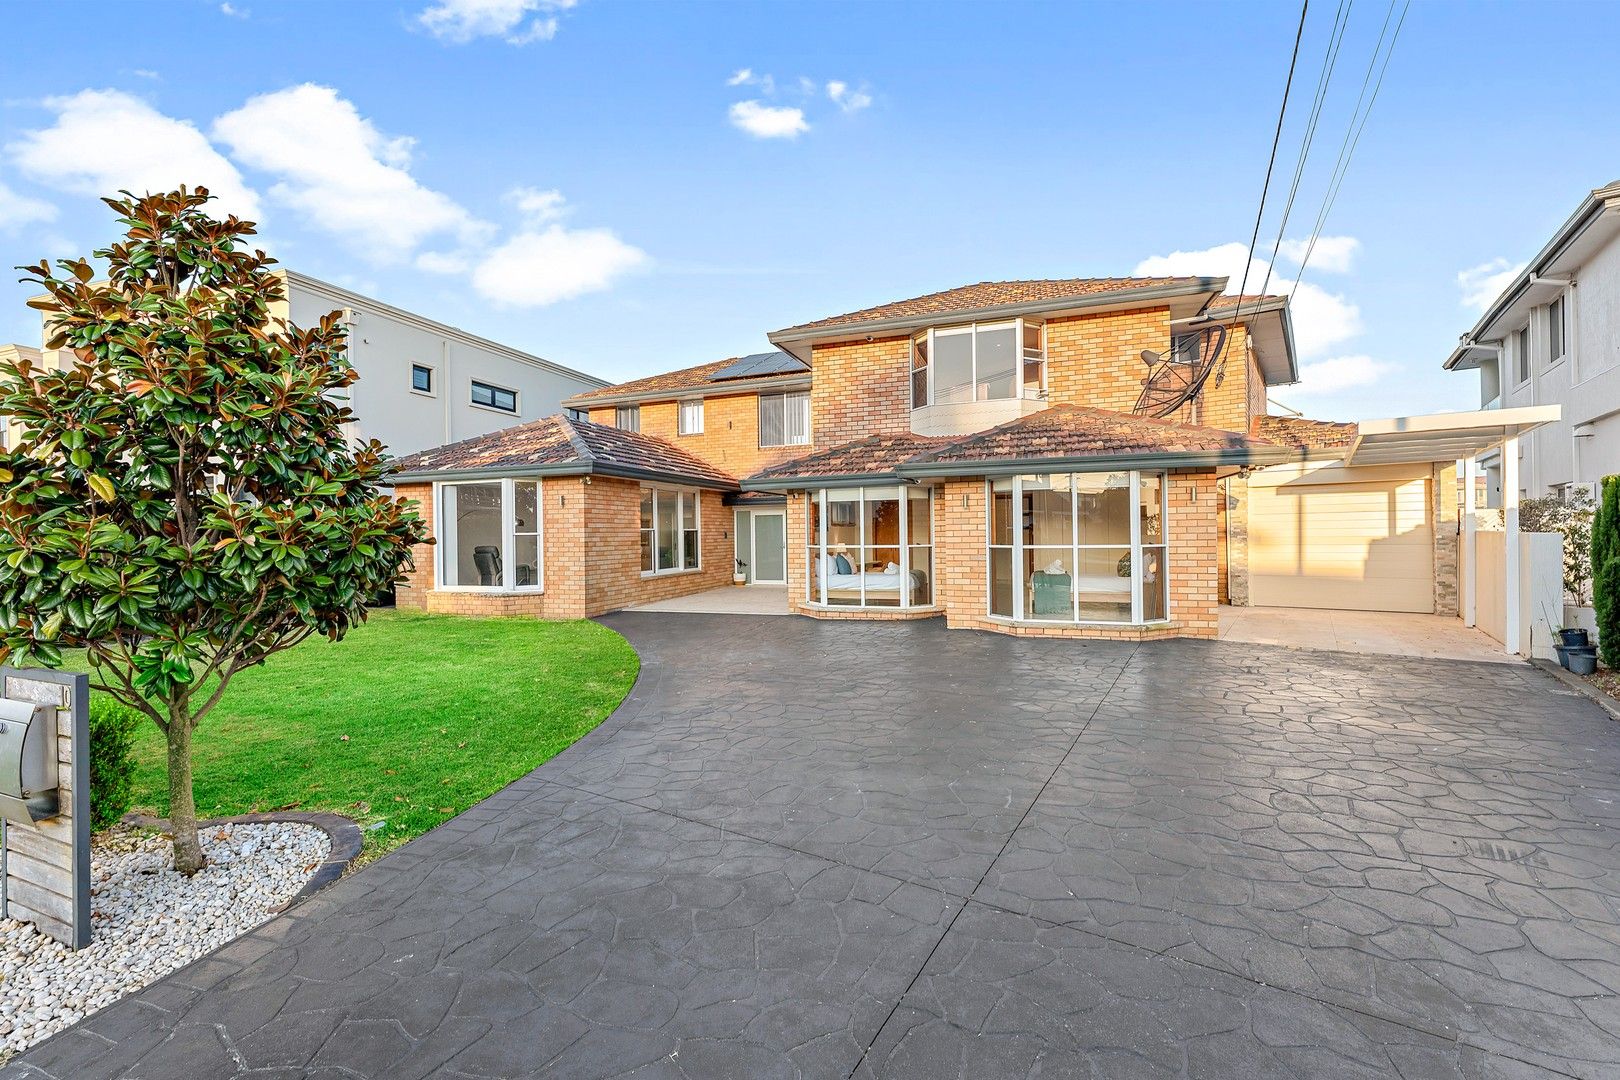 6 bedrooms House in 10 Castlereagh Crescent SYLVANIA WATERS NSW, 2224